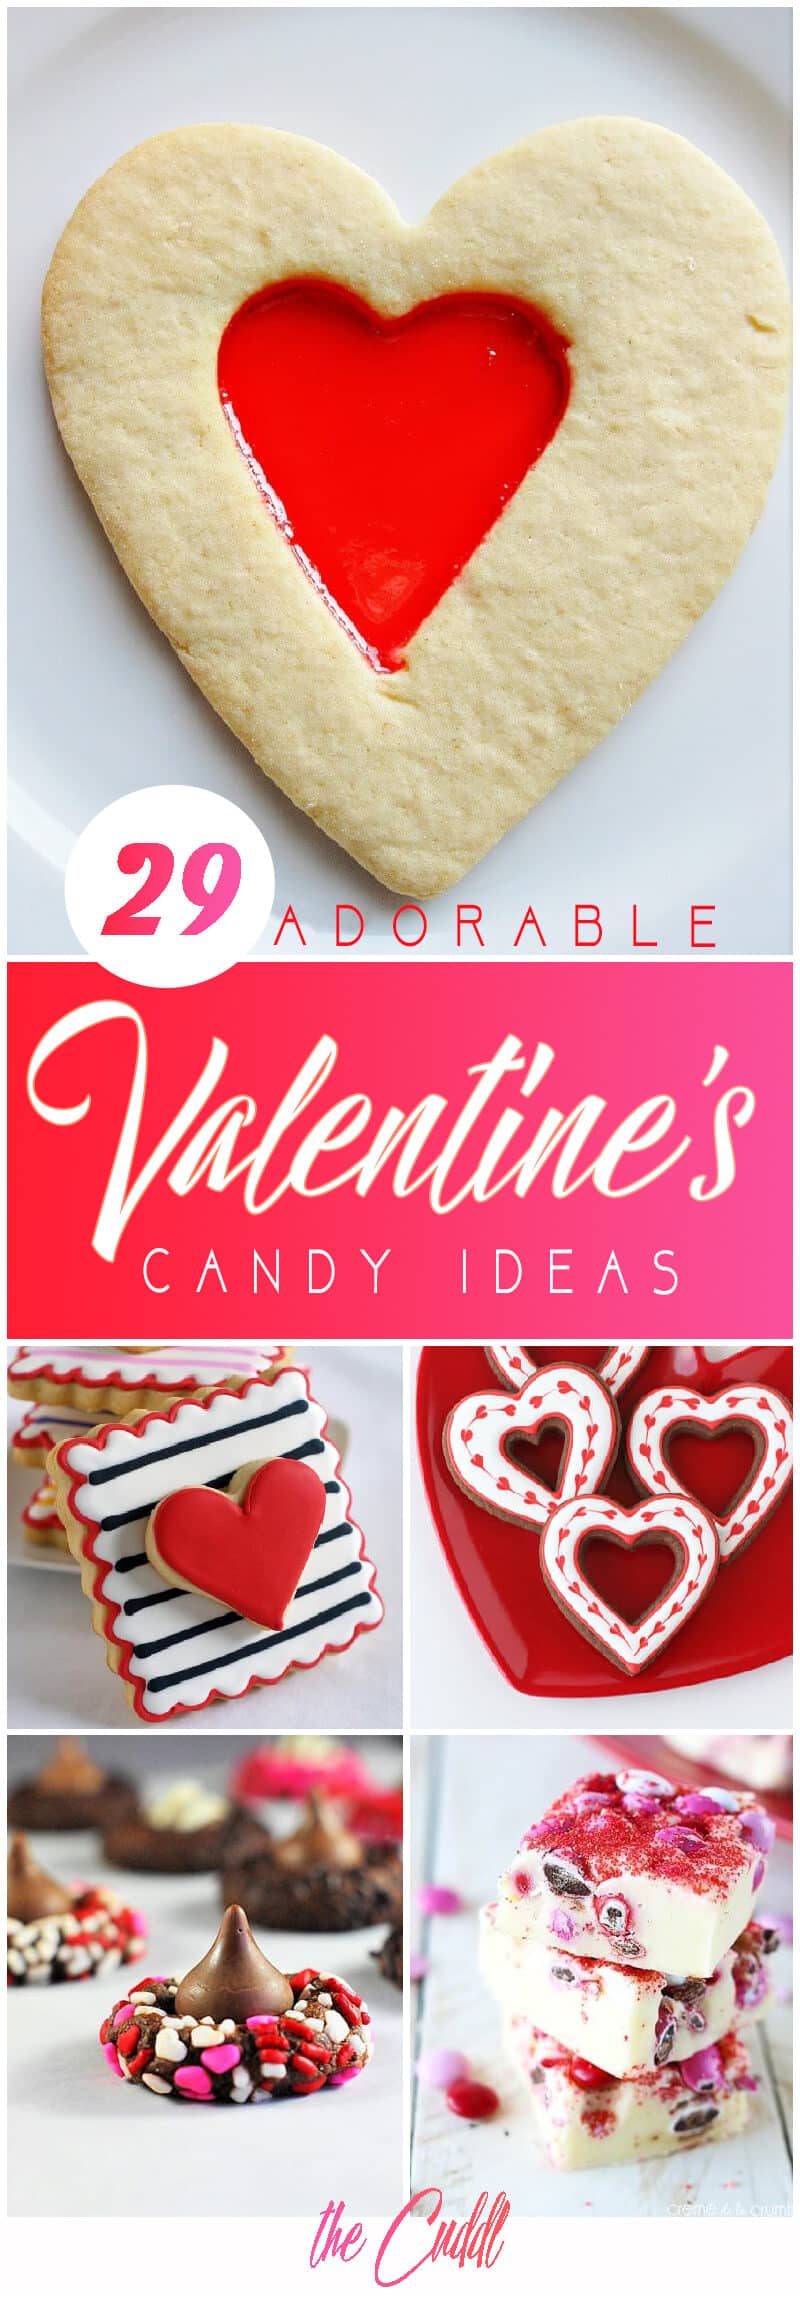 29 Adorable Valentine's day candy idea